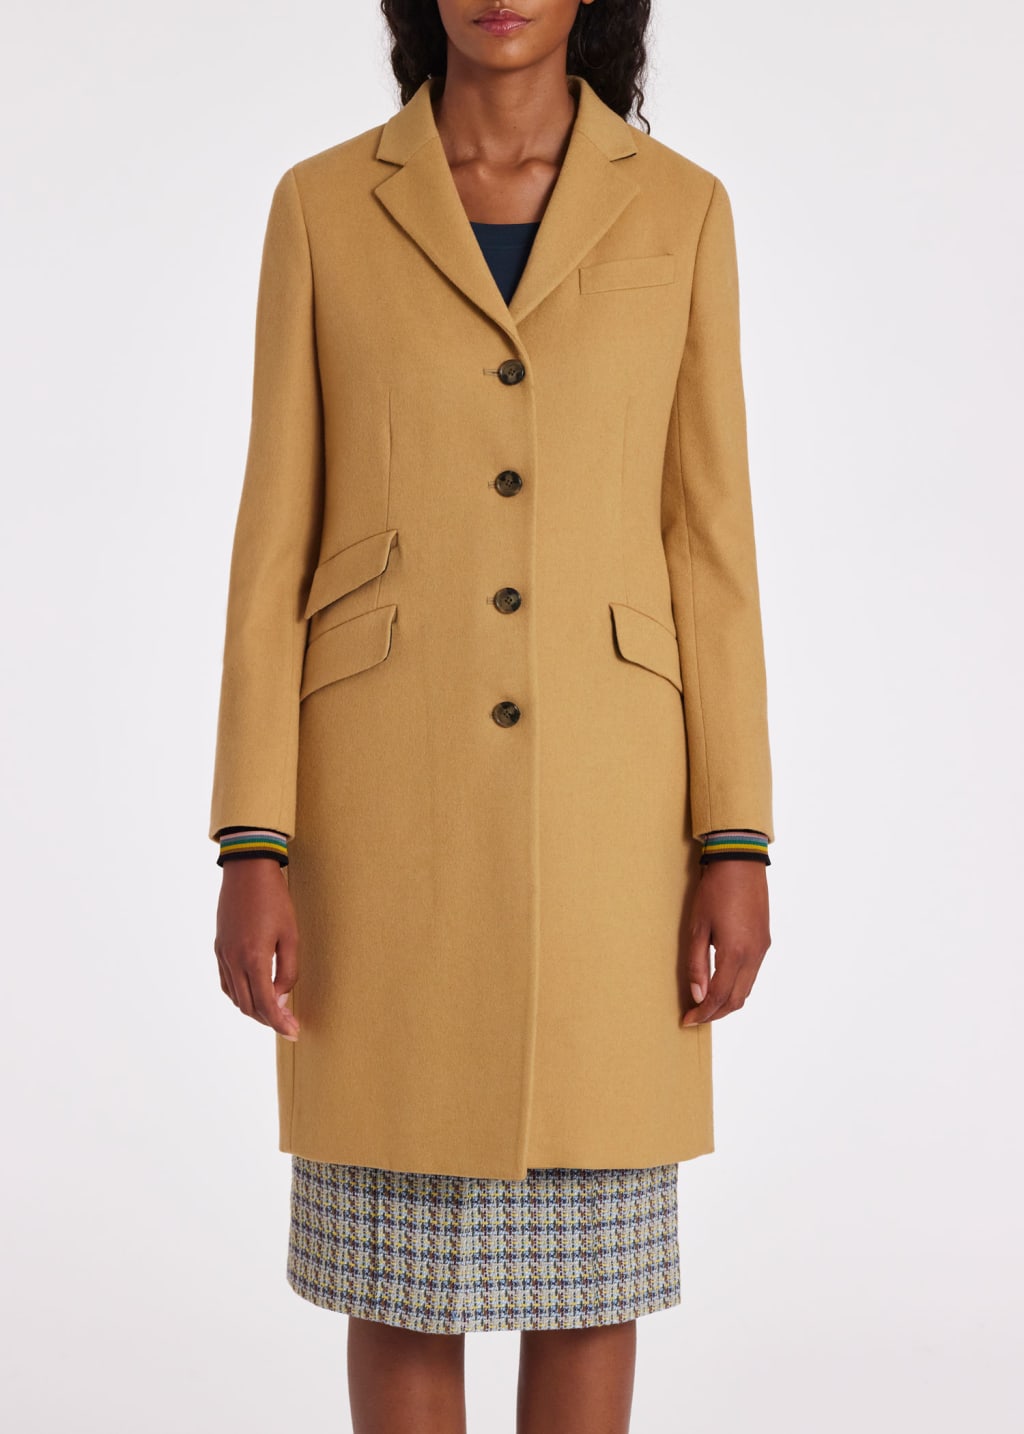 Model View - Women's Camel Wool-Cashmere Epsom Coat by Paul Smith